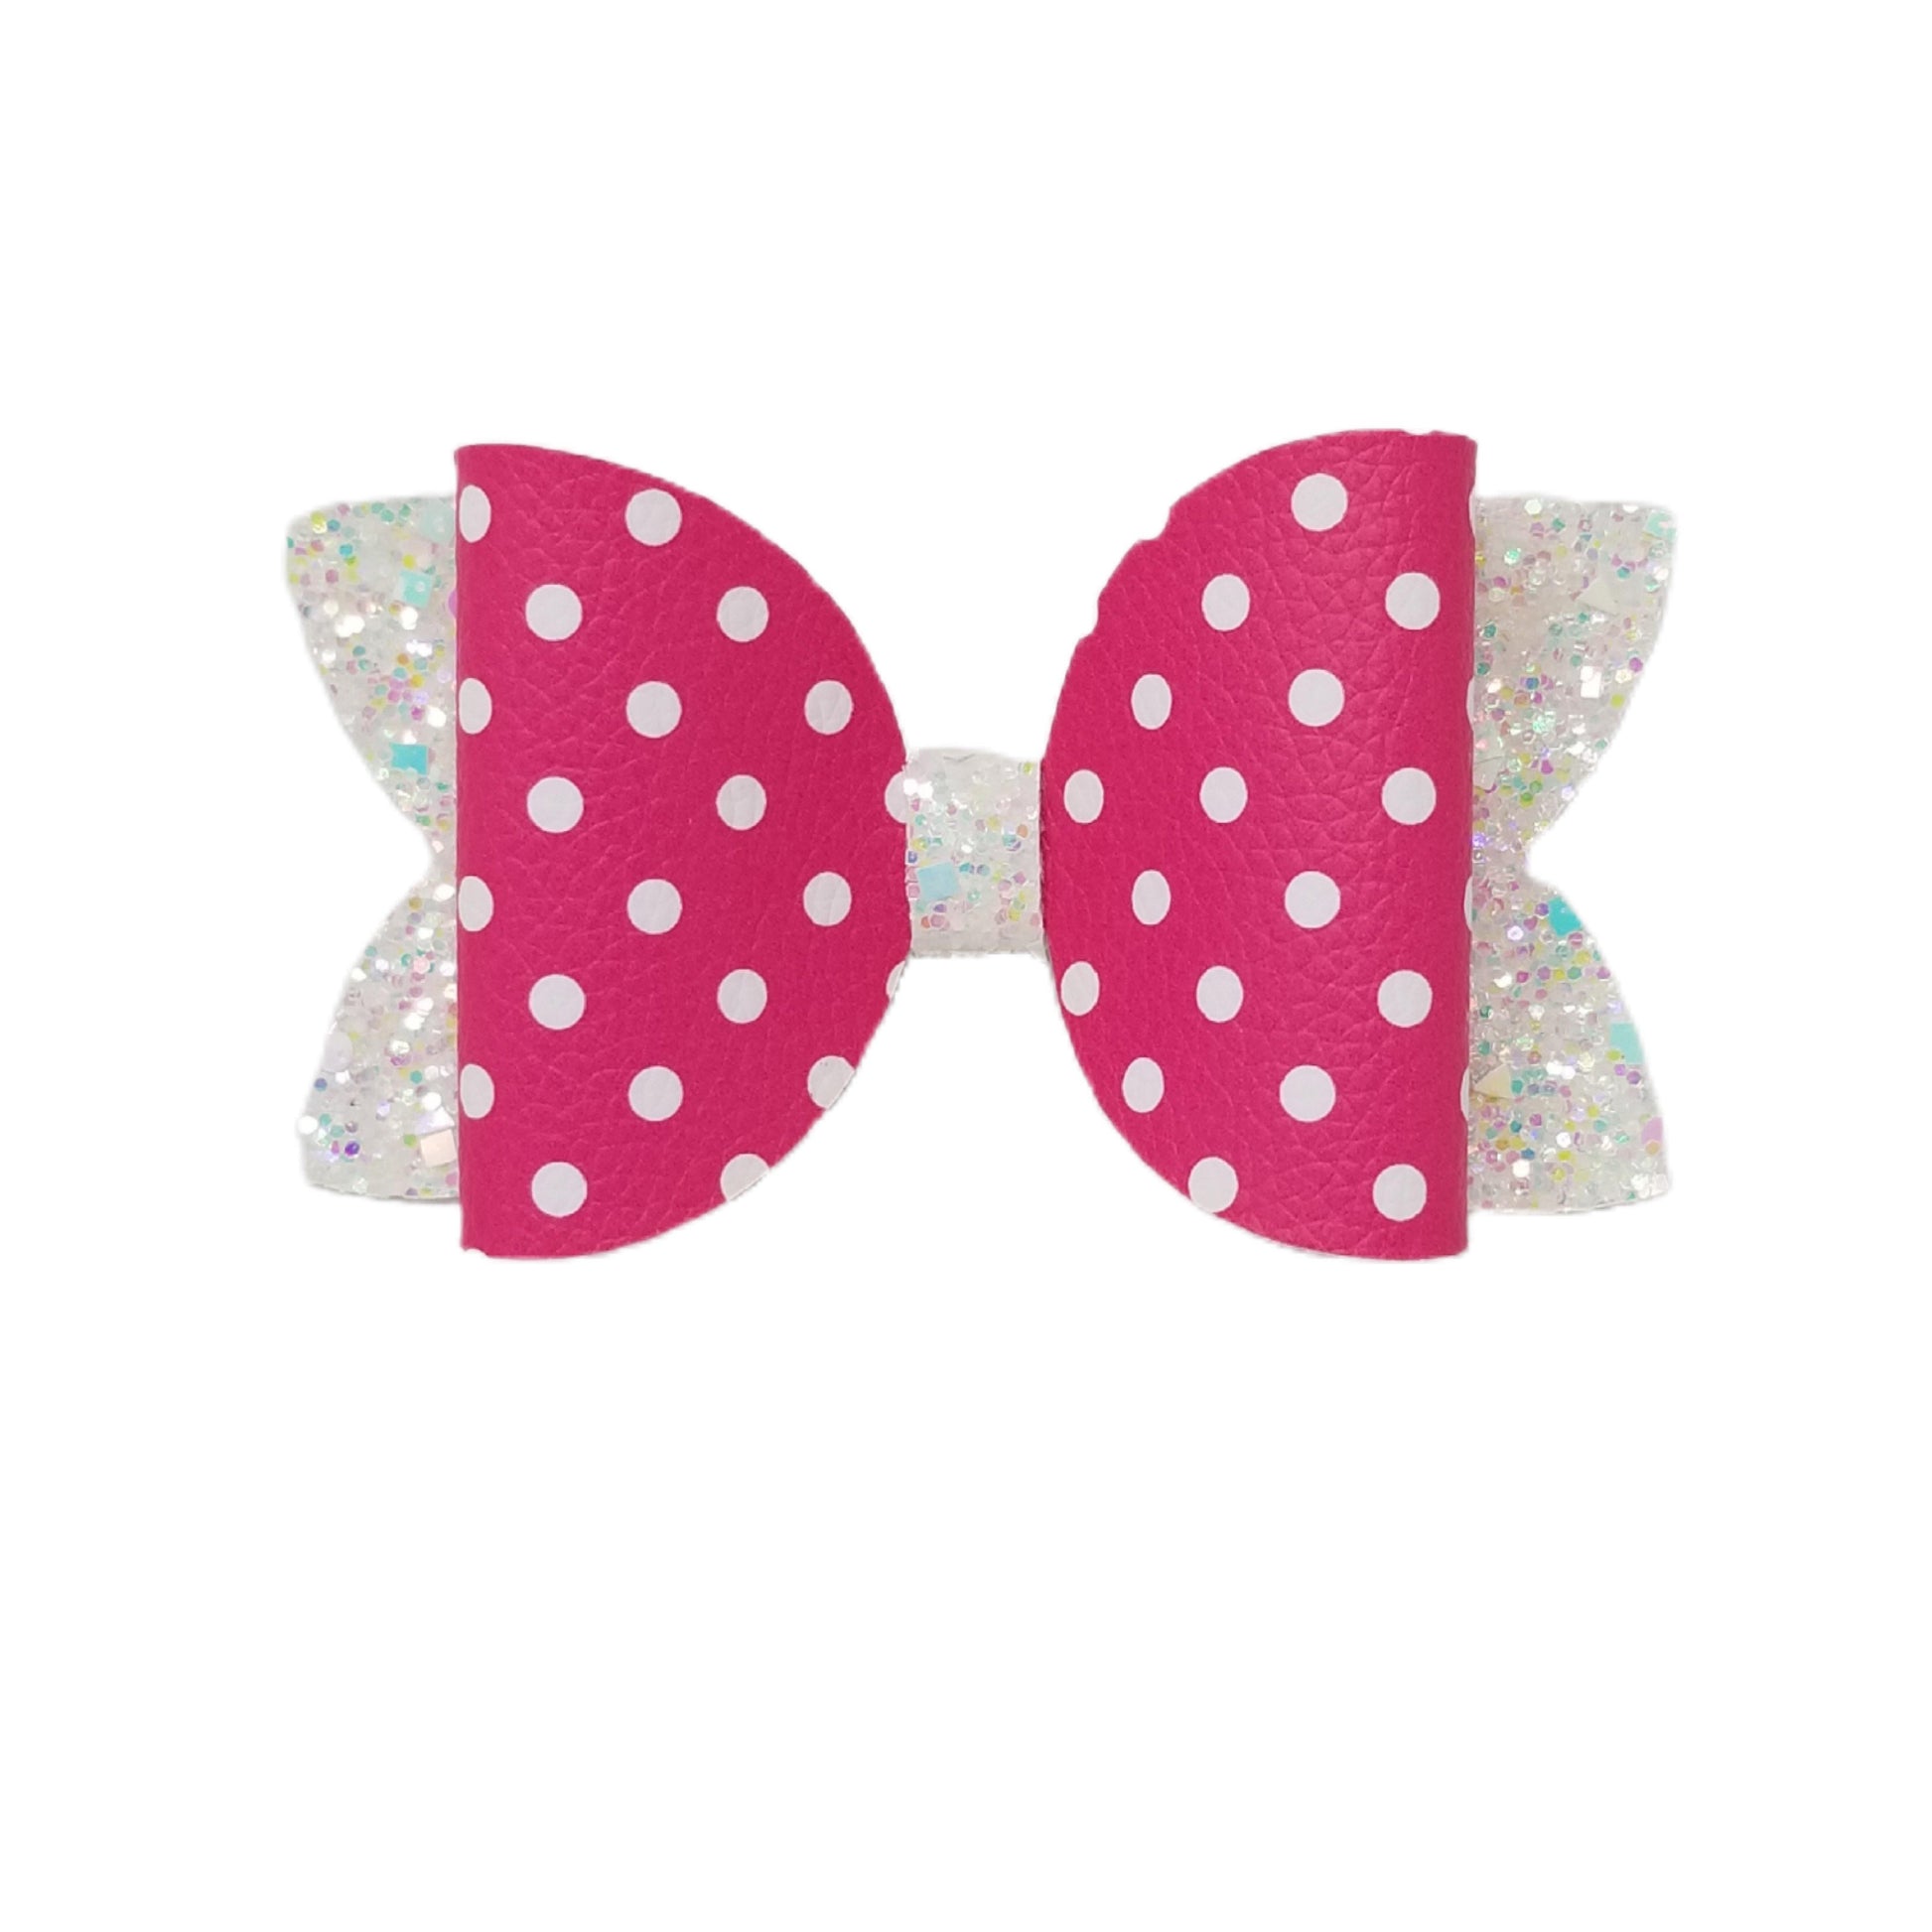 4 inch White Polka-dots on Hot Pink Diva Bow